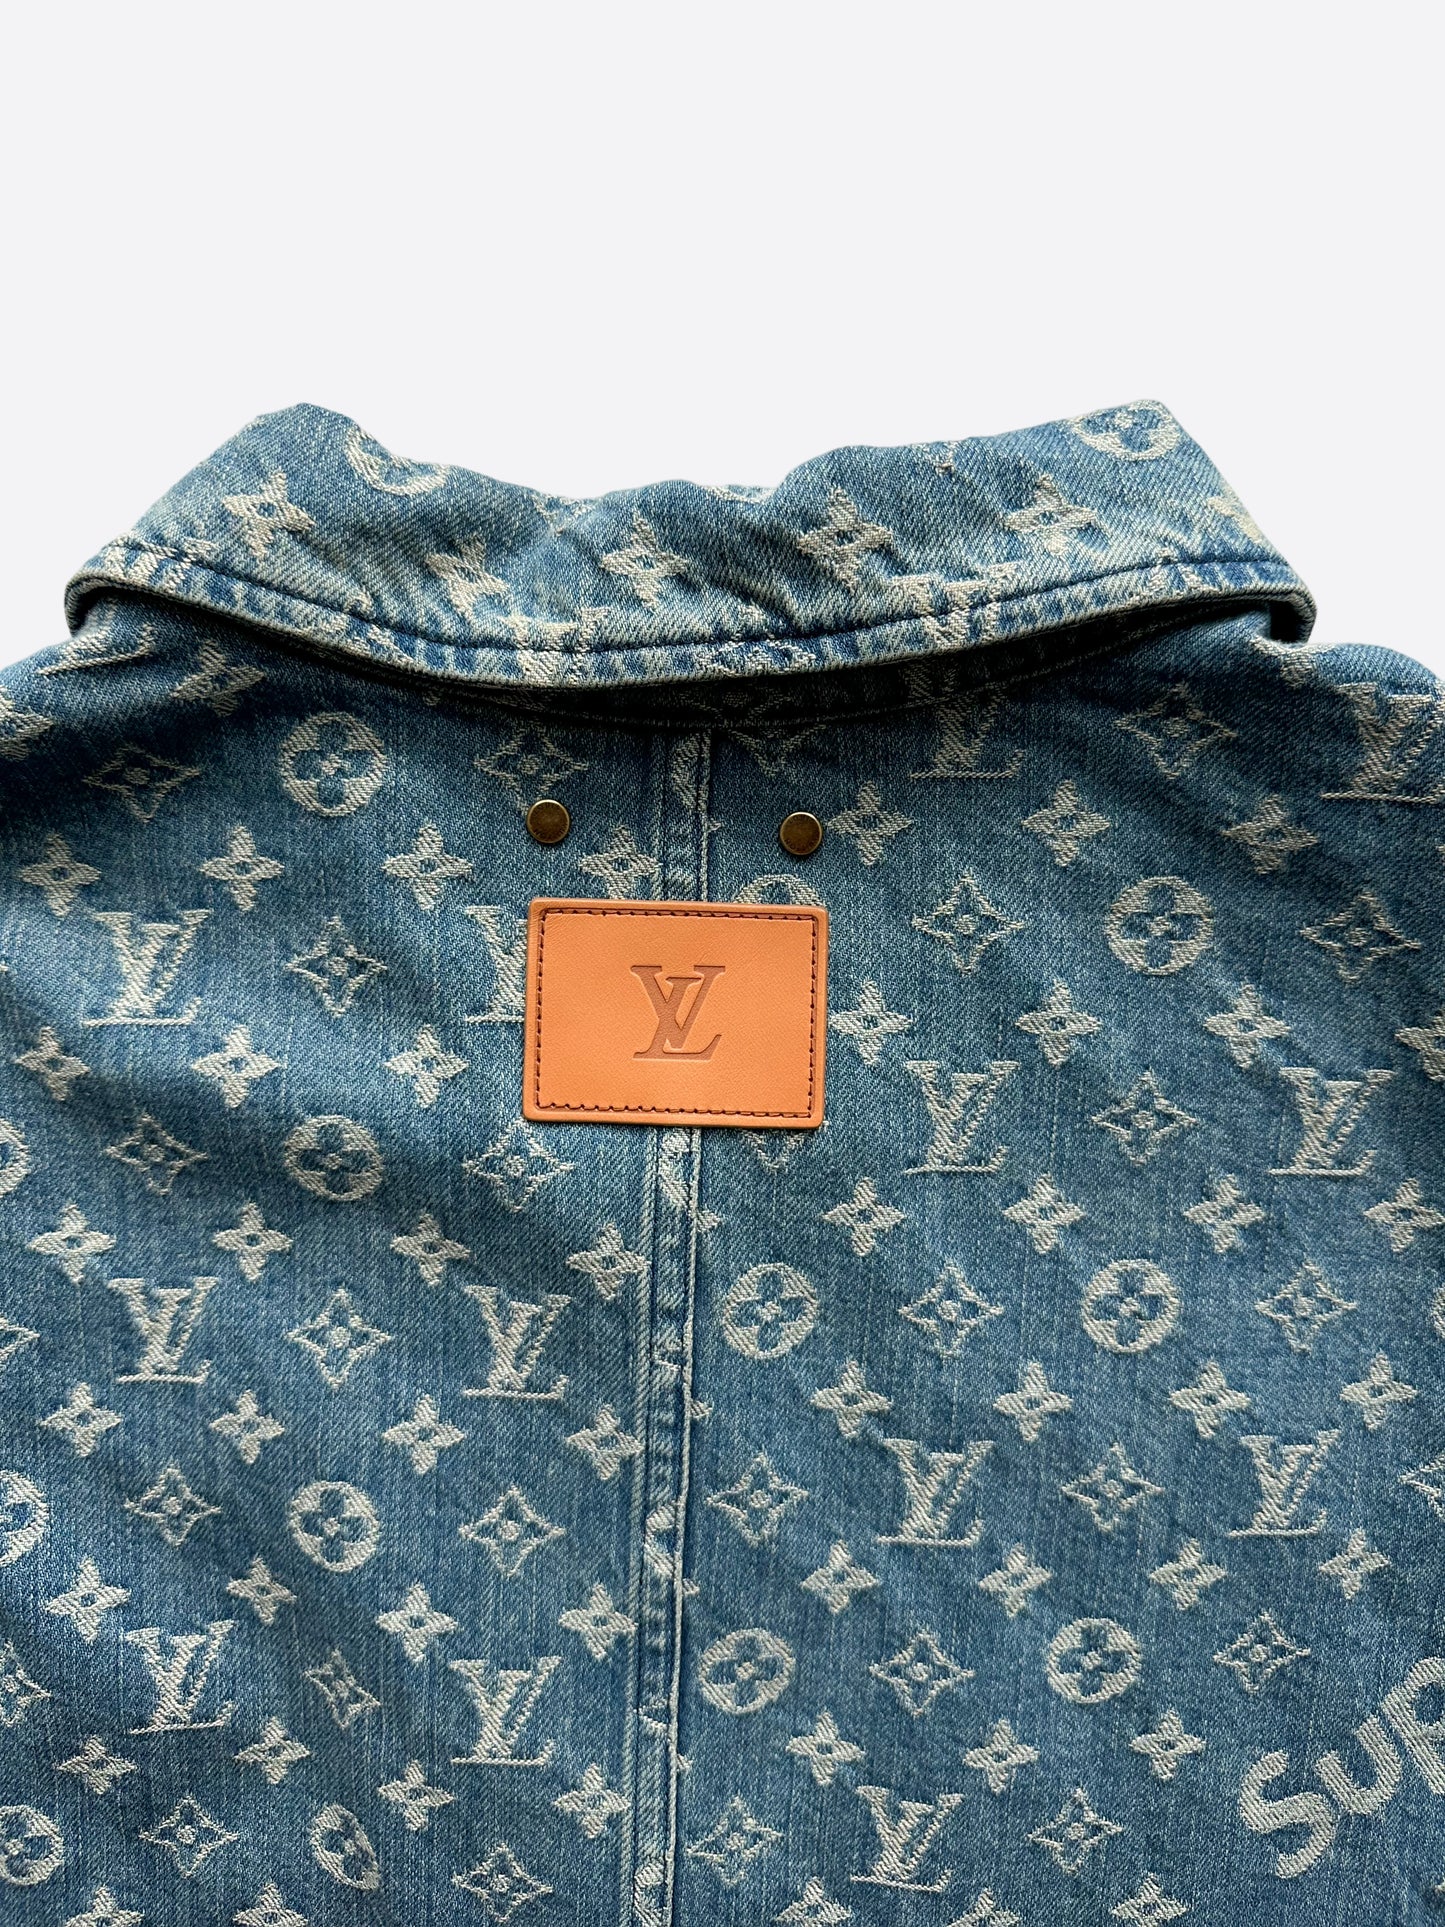 supreme and louis vuitton jacket